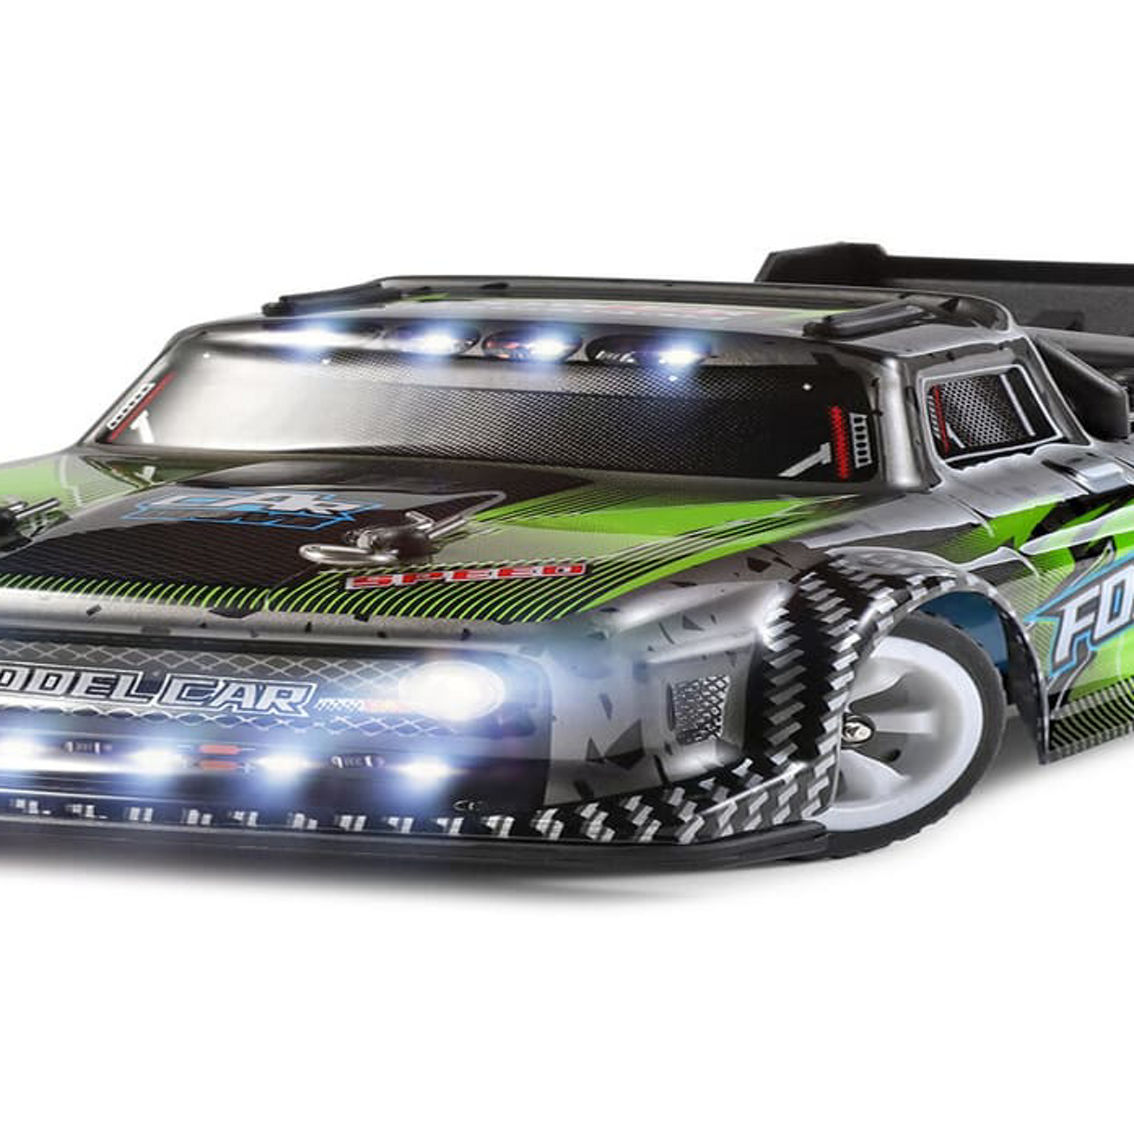 CIS-284131 1:28 scale Hoonigan truck with lights - Image 2 of 5